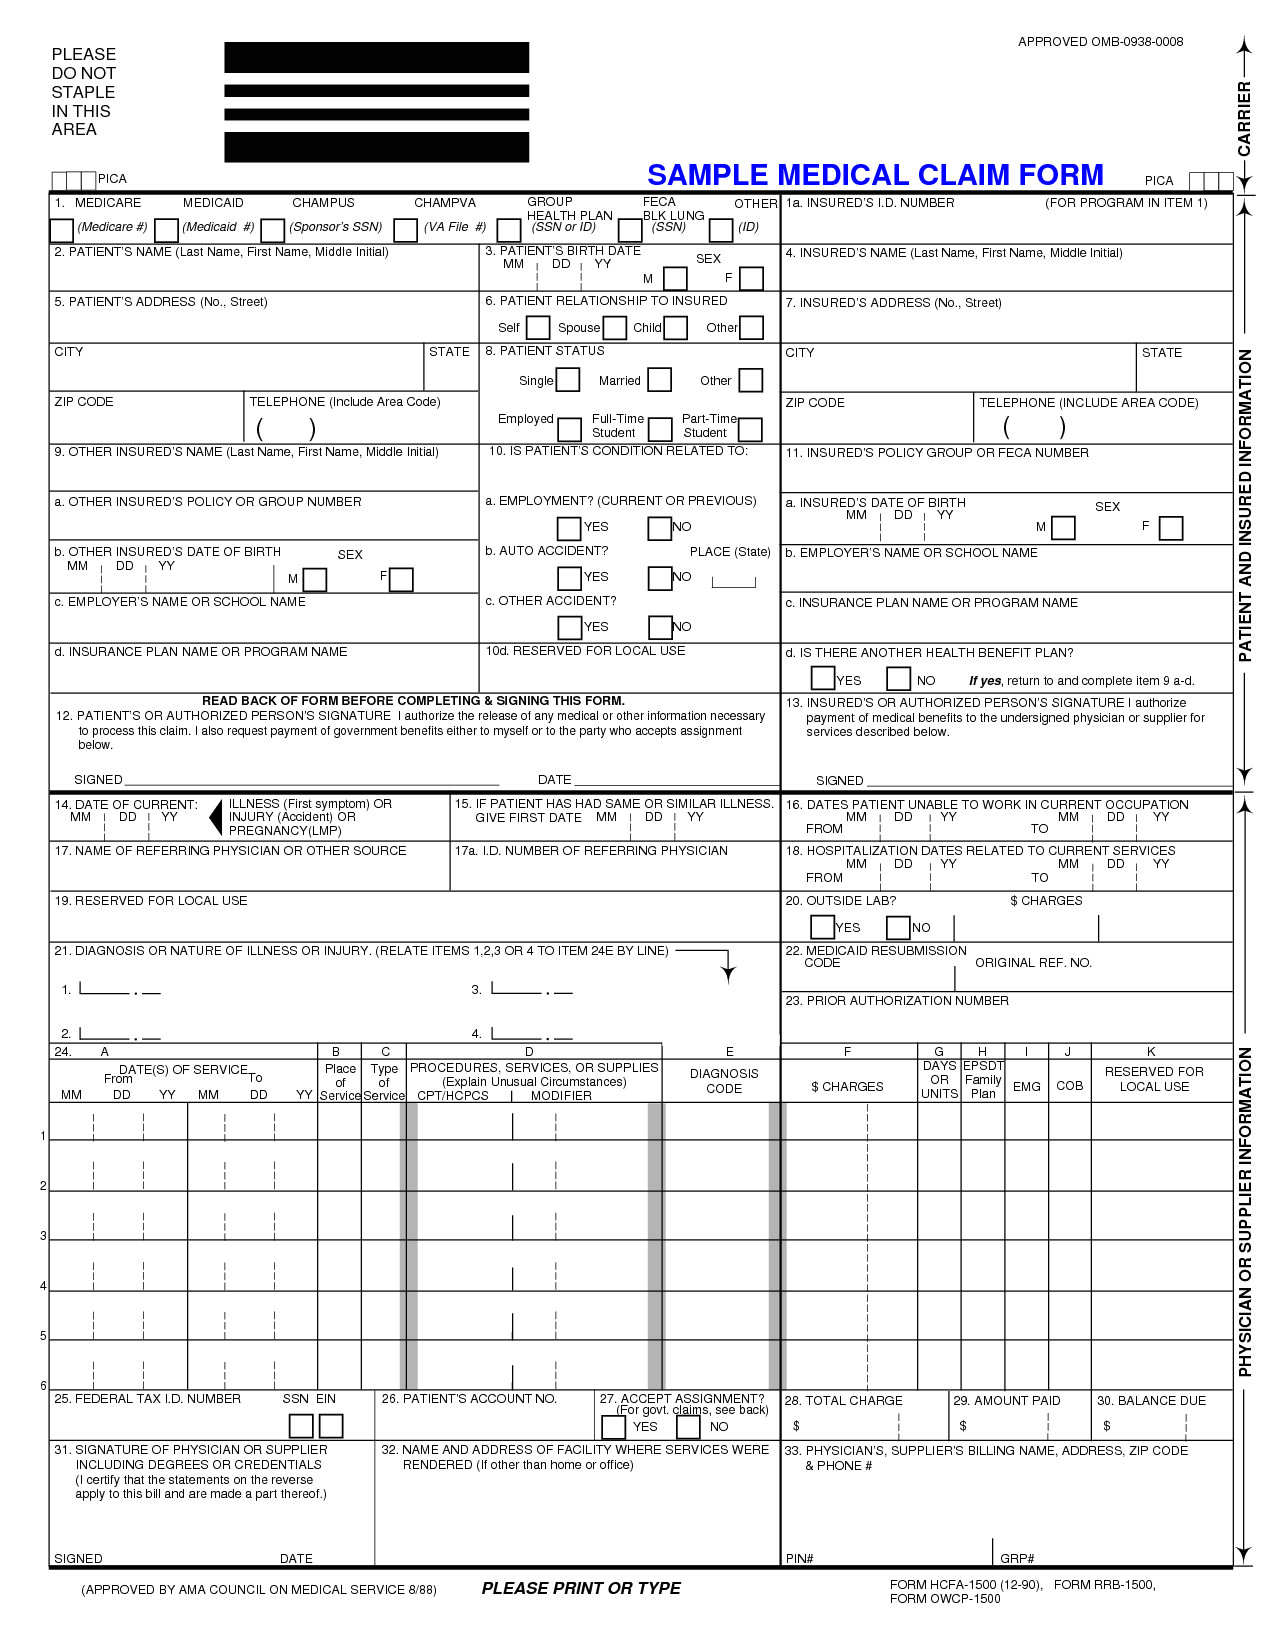 post universal claim form template 196786